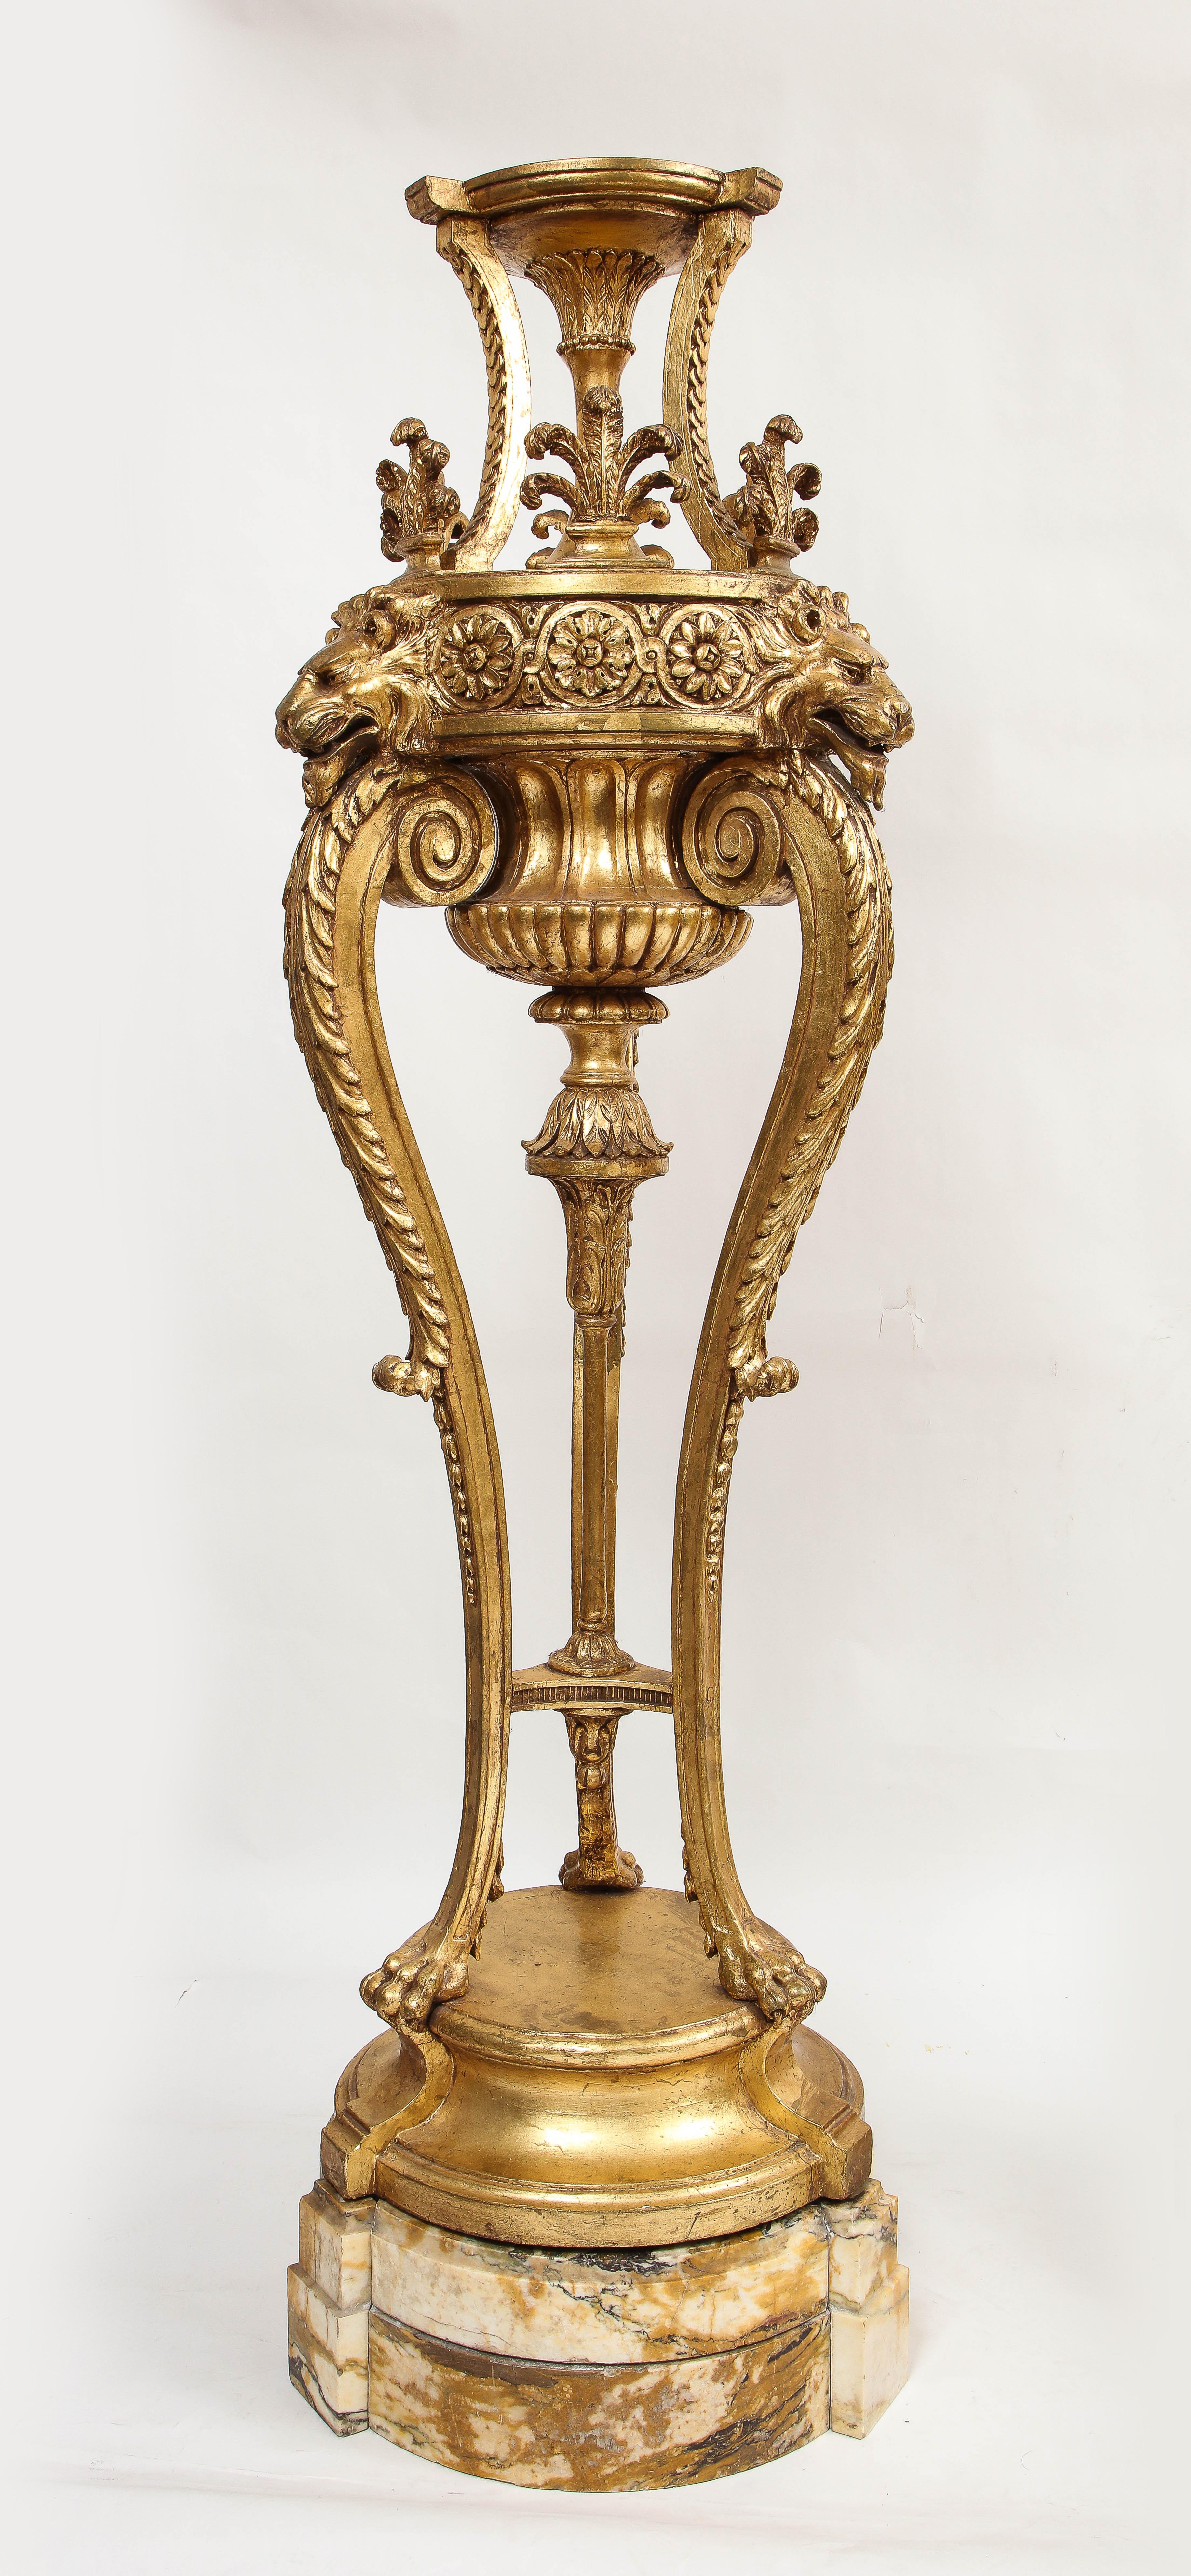 Hand-Carved A Pair of Monumental 19th Century Giltwood Torchieres with Original Marble Bases